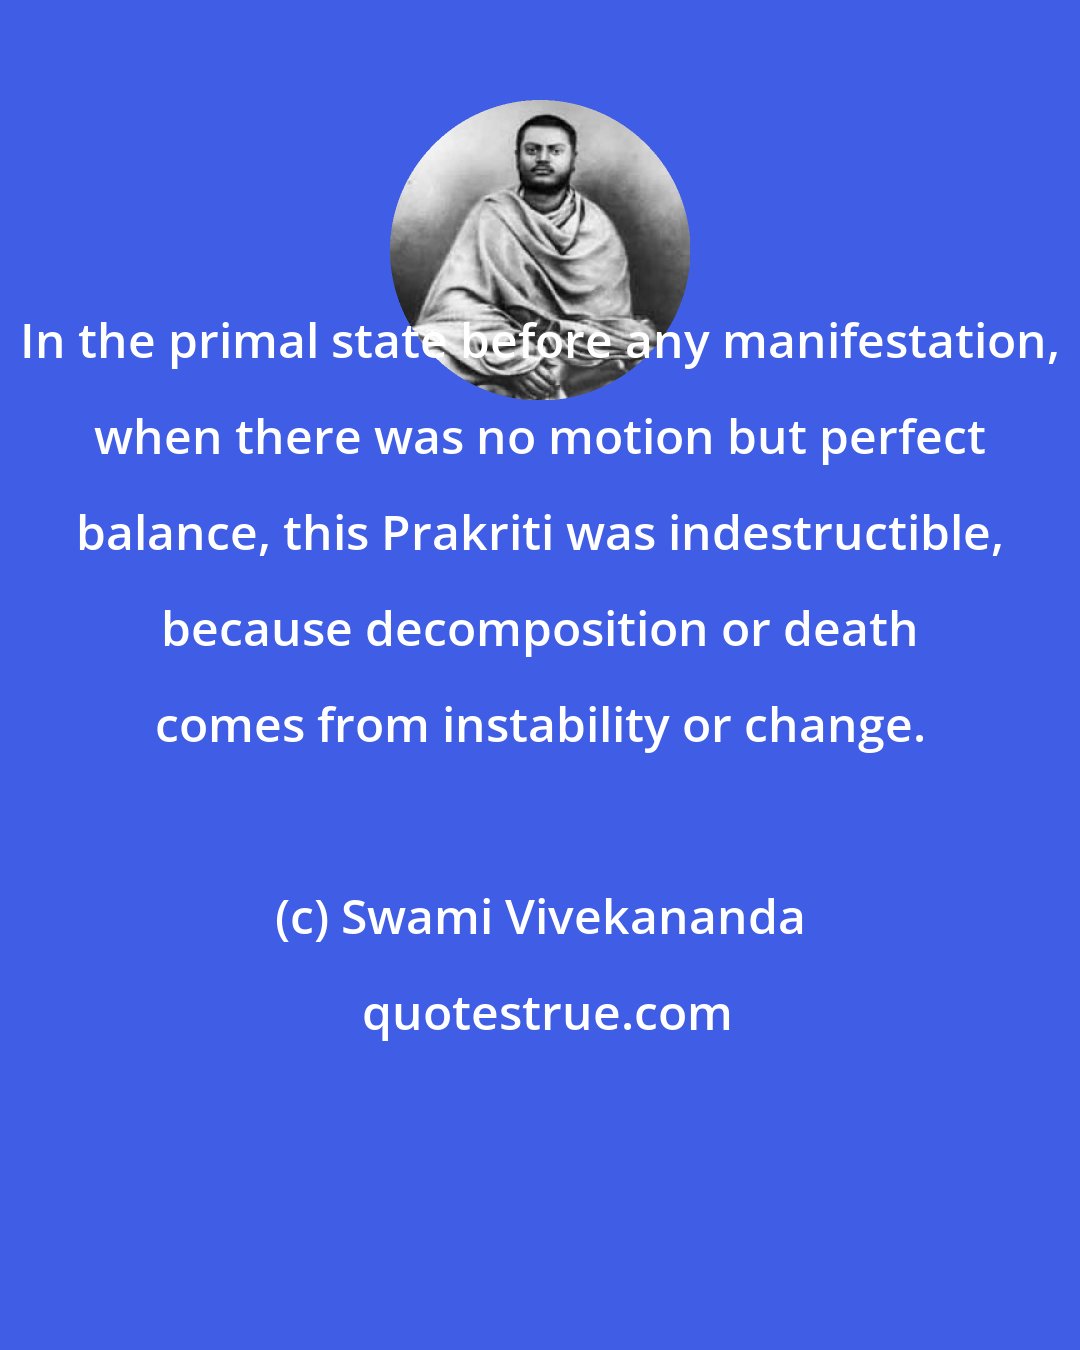 Swami Vivekananda: In the primal state before any manifestation, when there was no motion but perfect balance, this Prakriti was indestructible, because decomposition or death comes from instability or change.